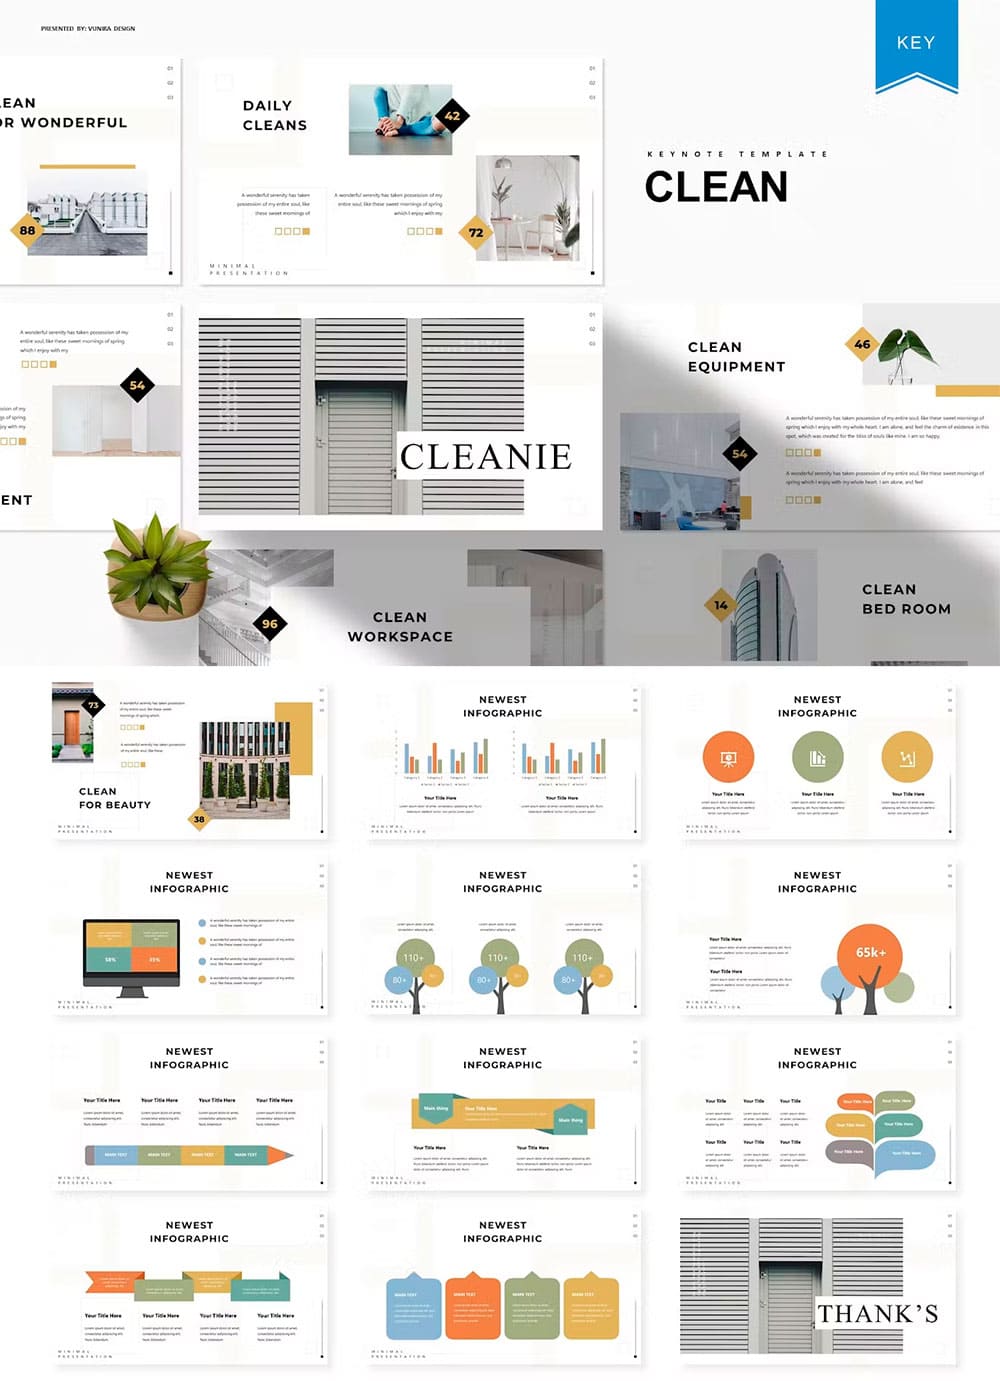 Clean keynote template, picture for pinterest.